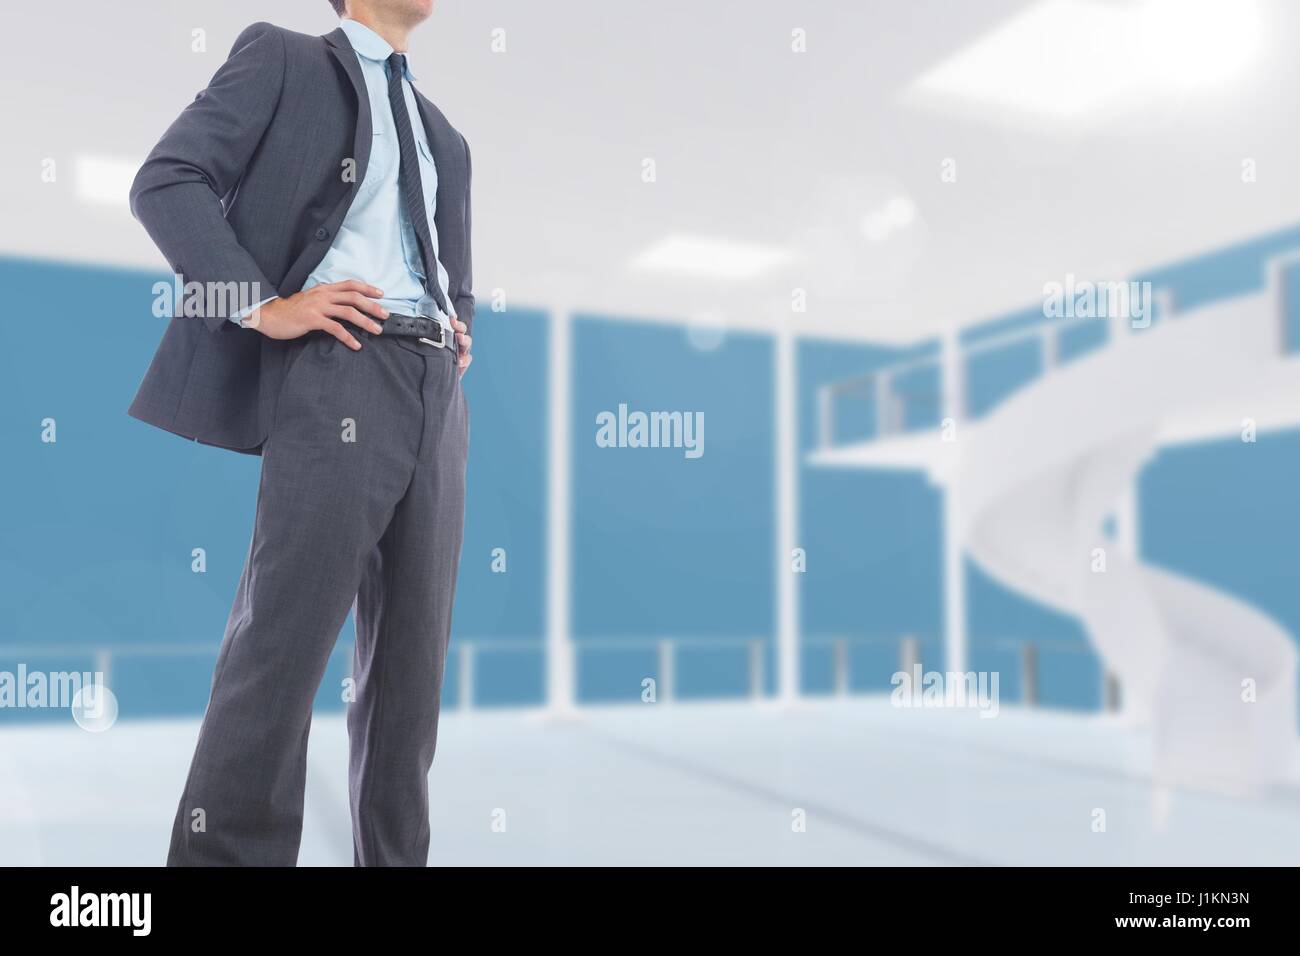 Digital composite of Midsection of businessman standing with hands on hips Stock Photo